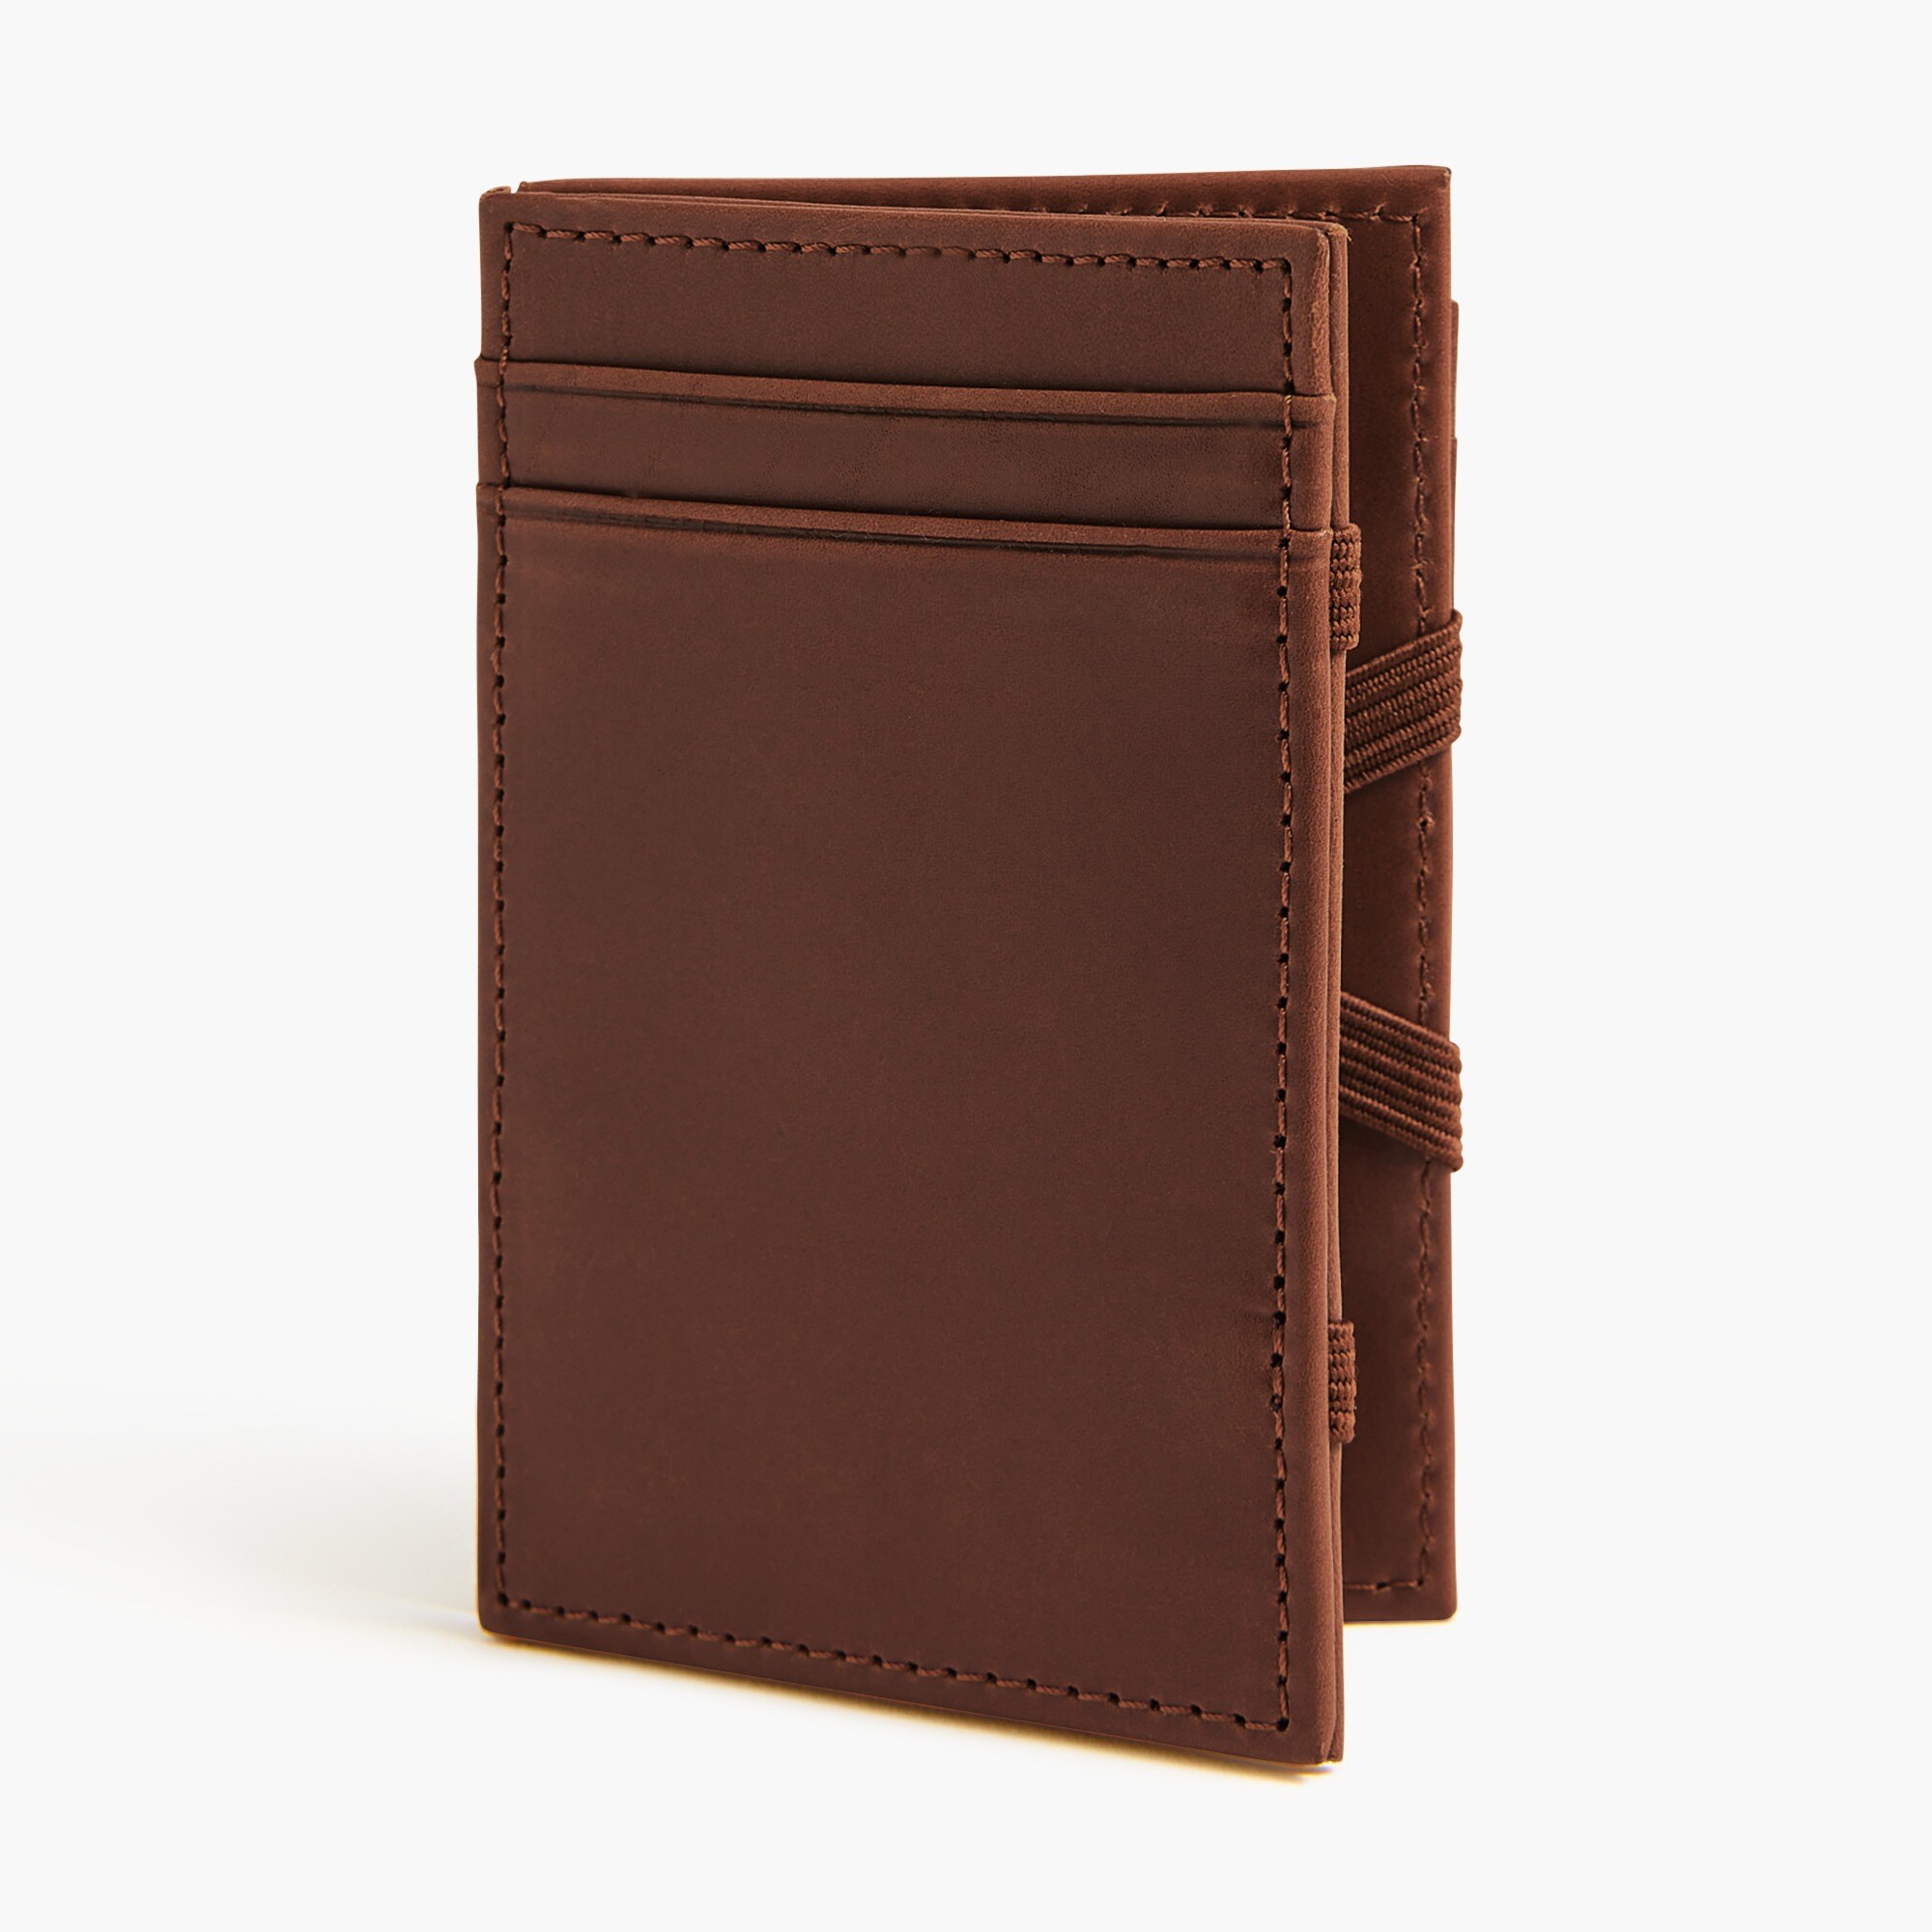  Leather wallet